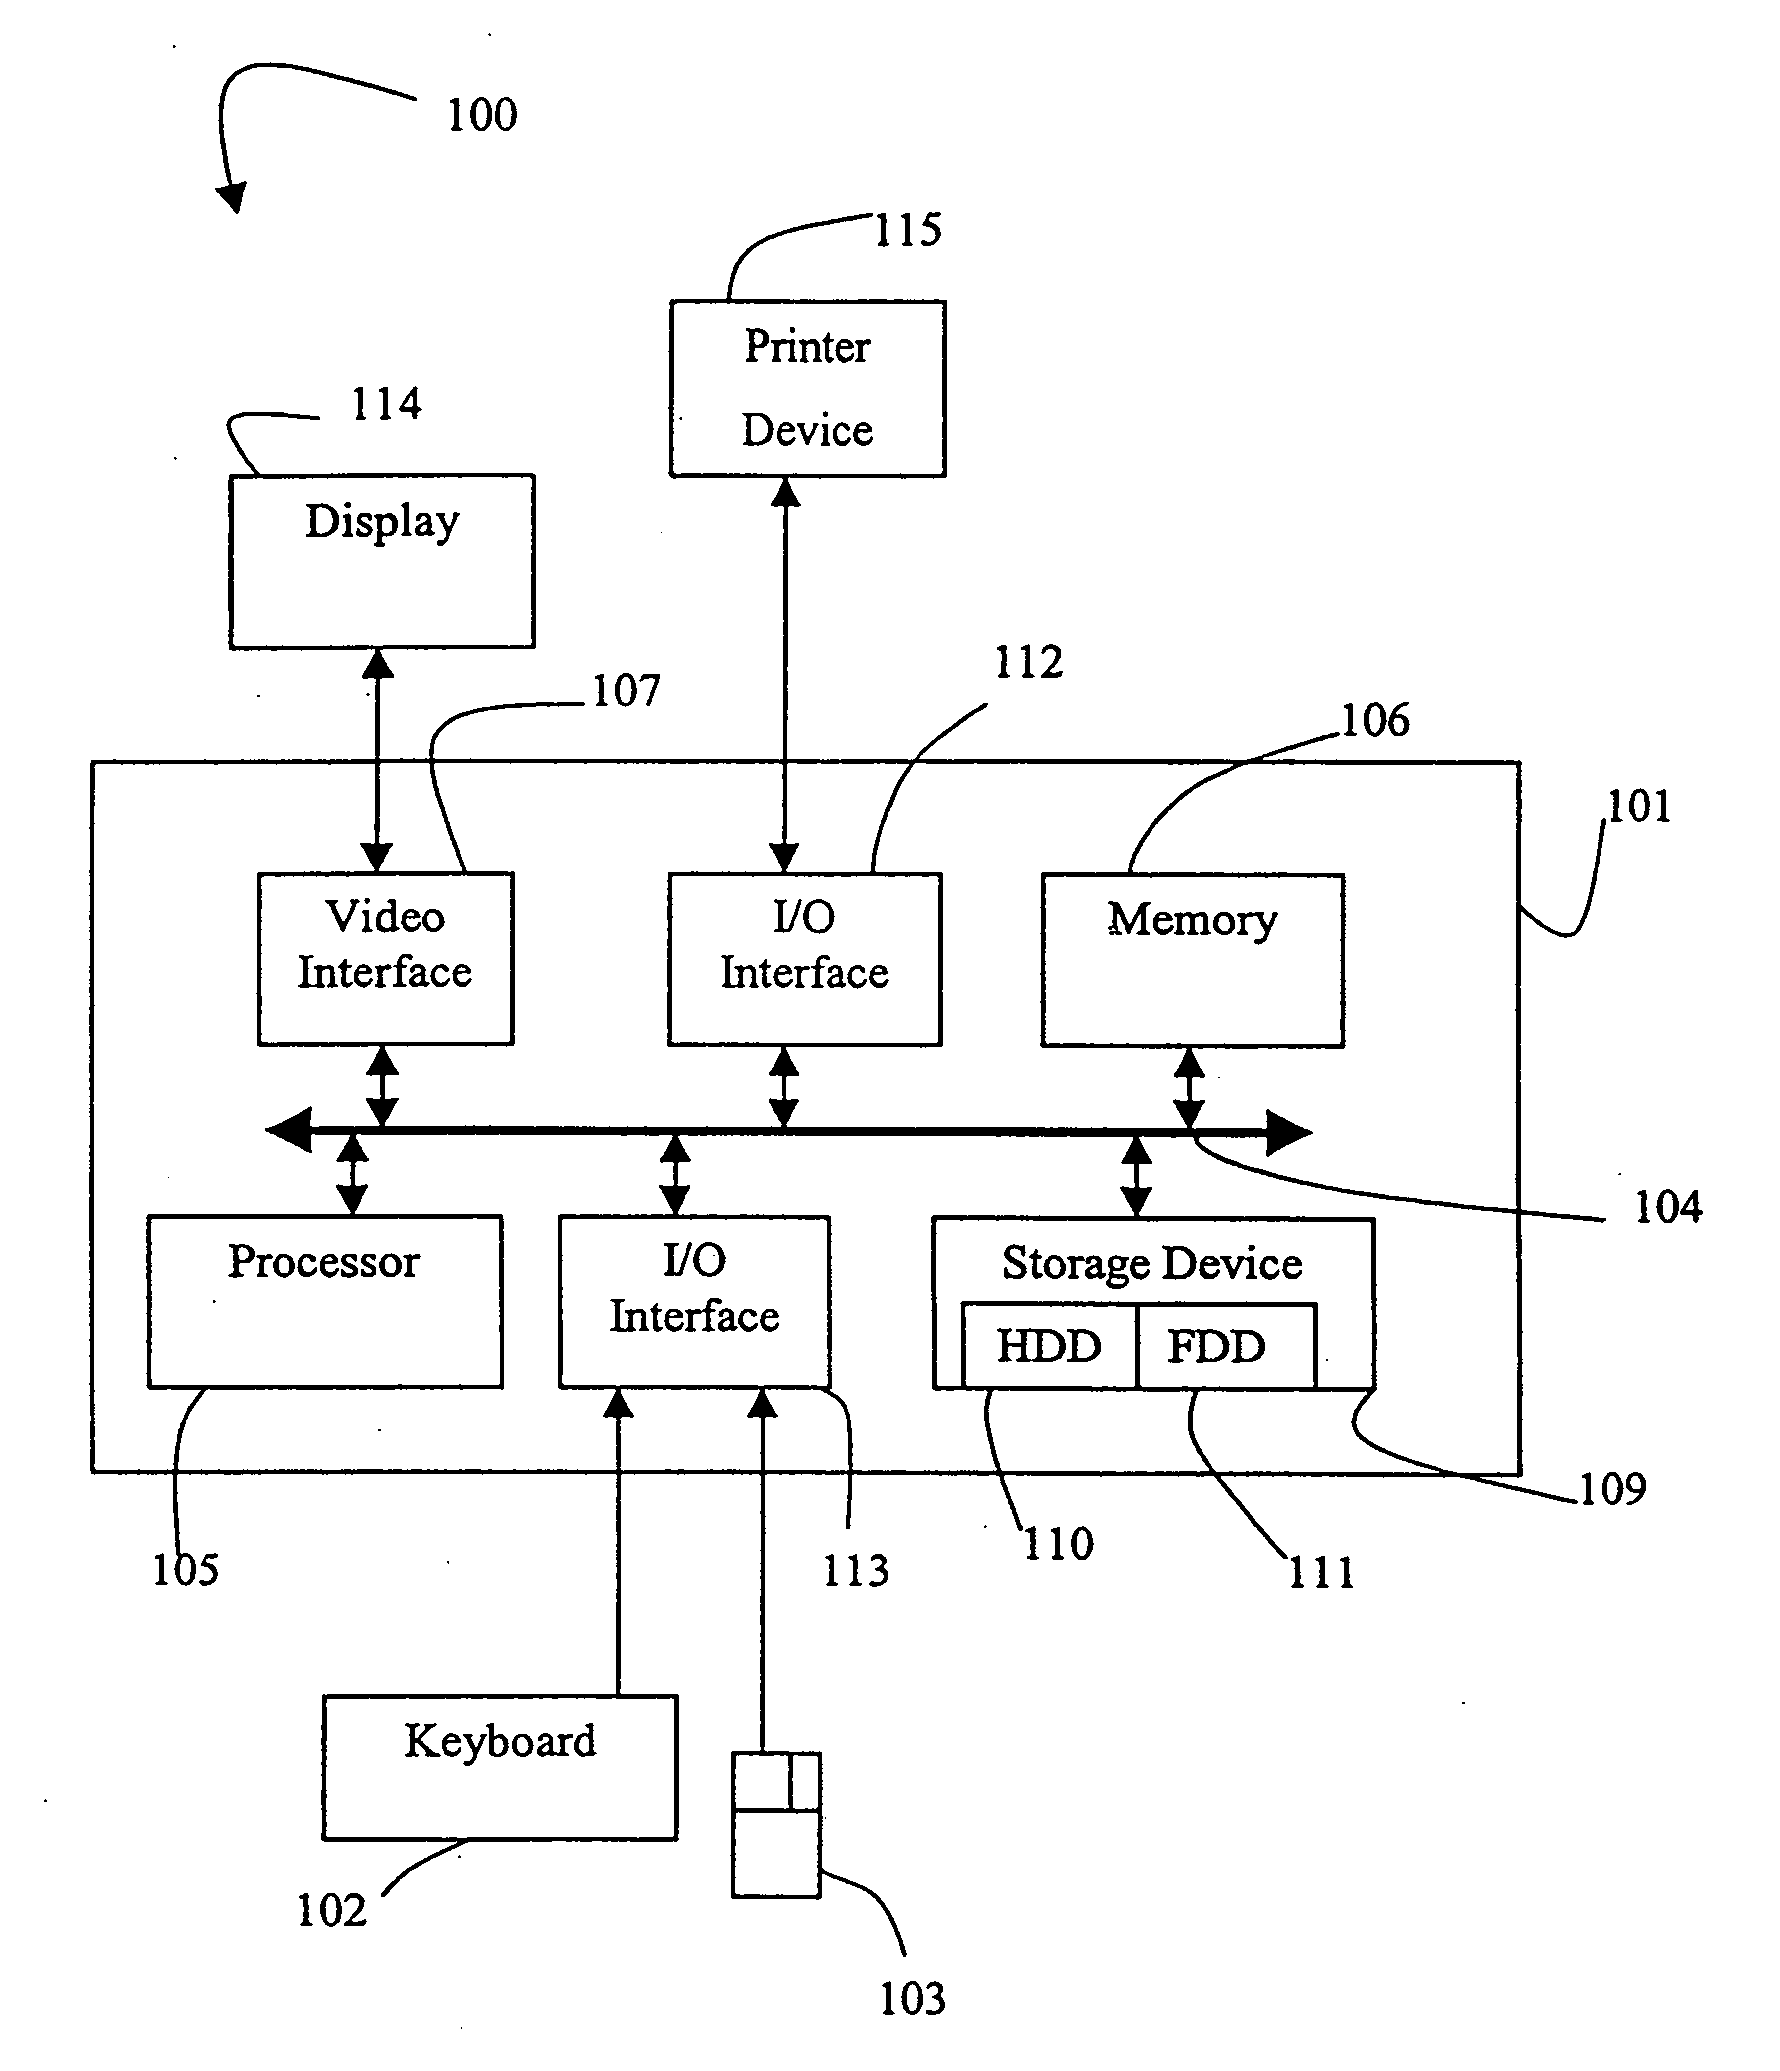 Method, apparatus and computer program product for network design and analysis